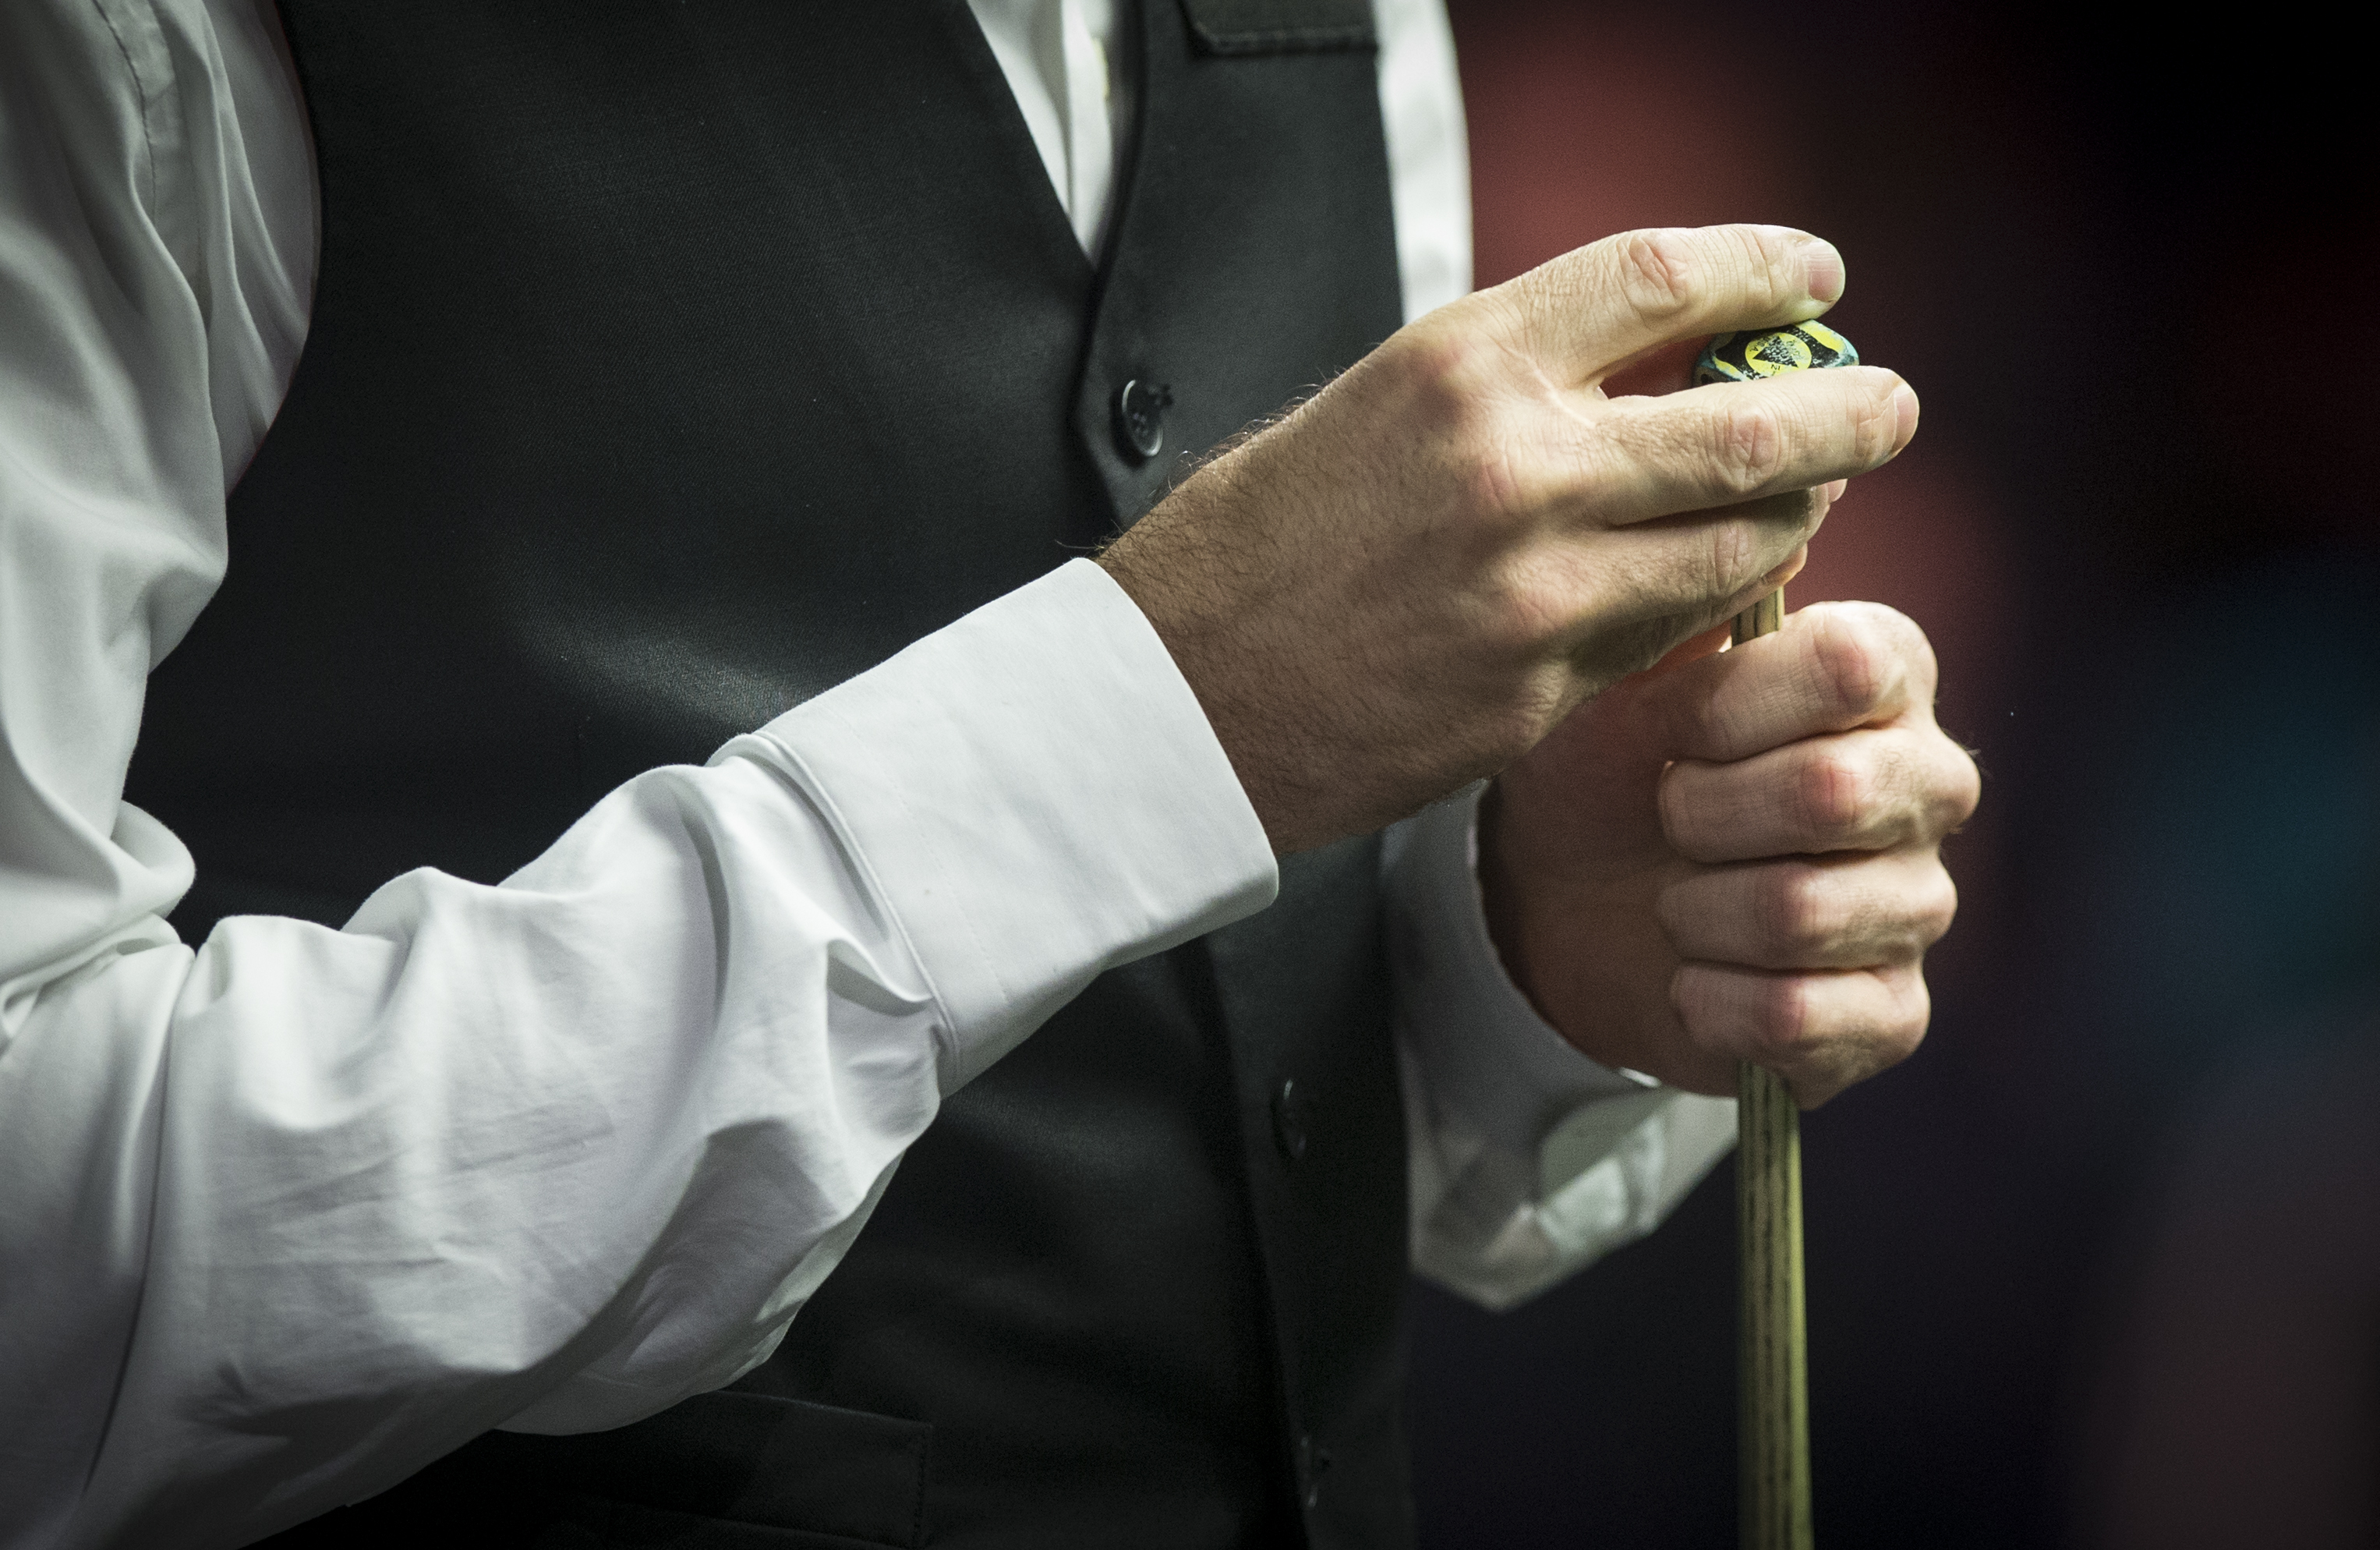 A snooker player chalks their cue